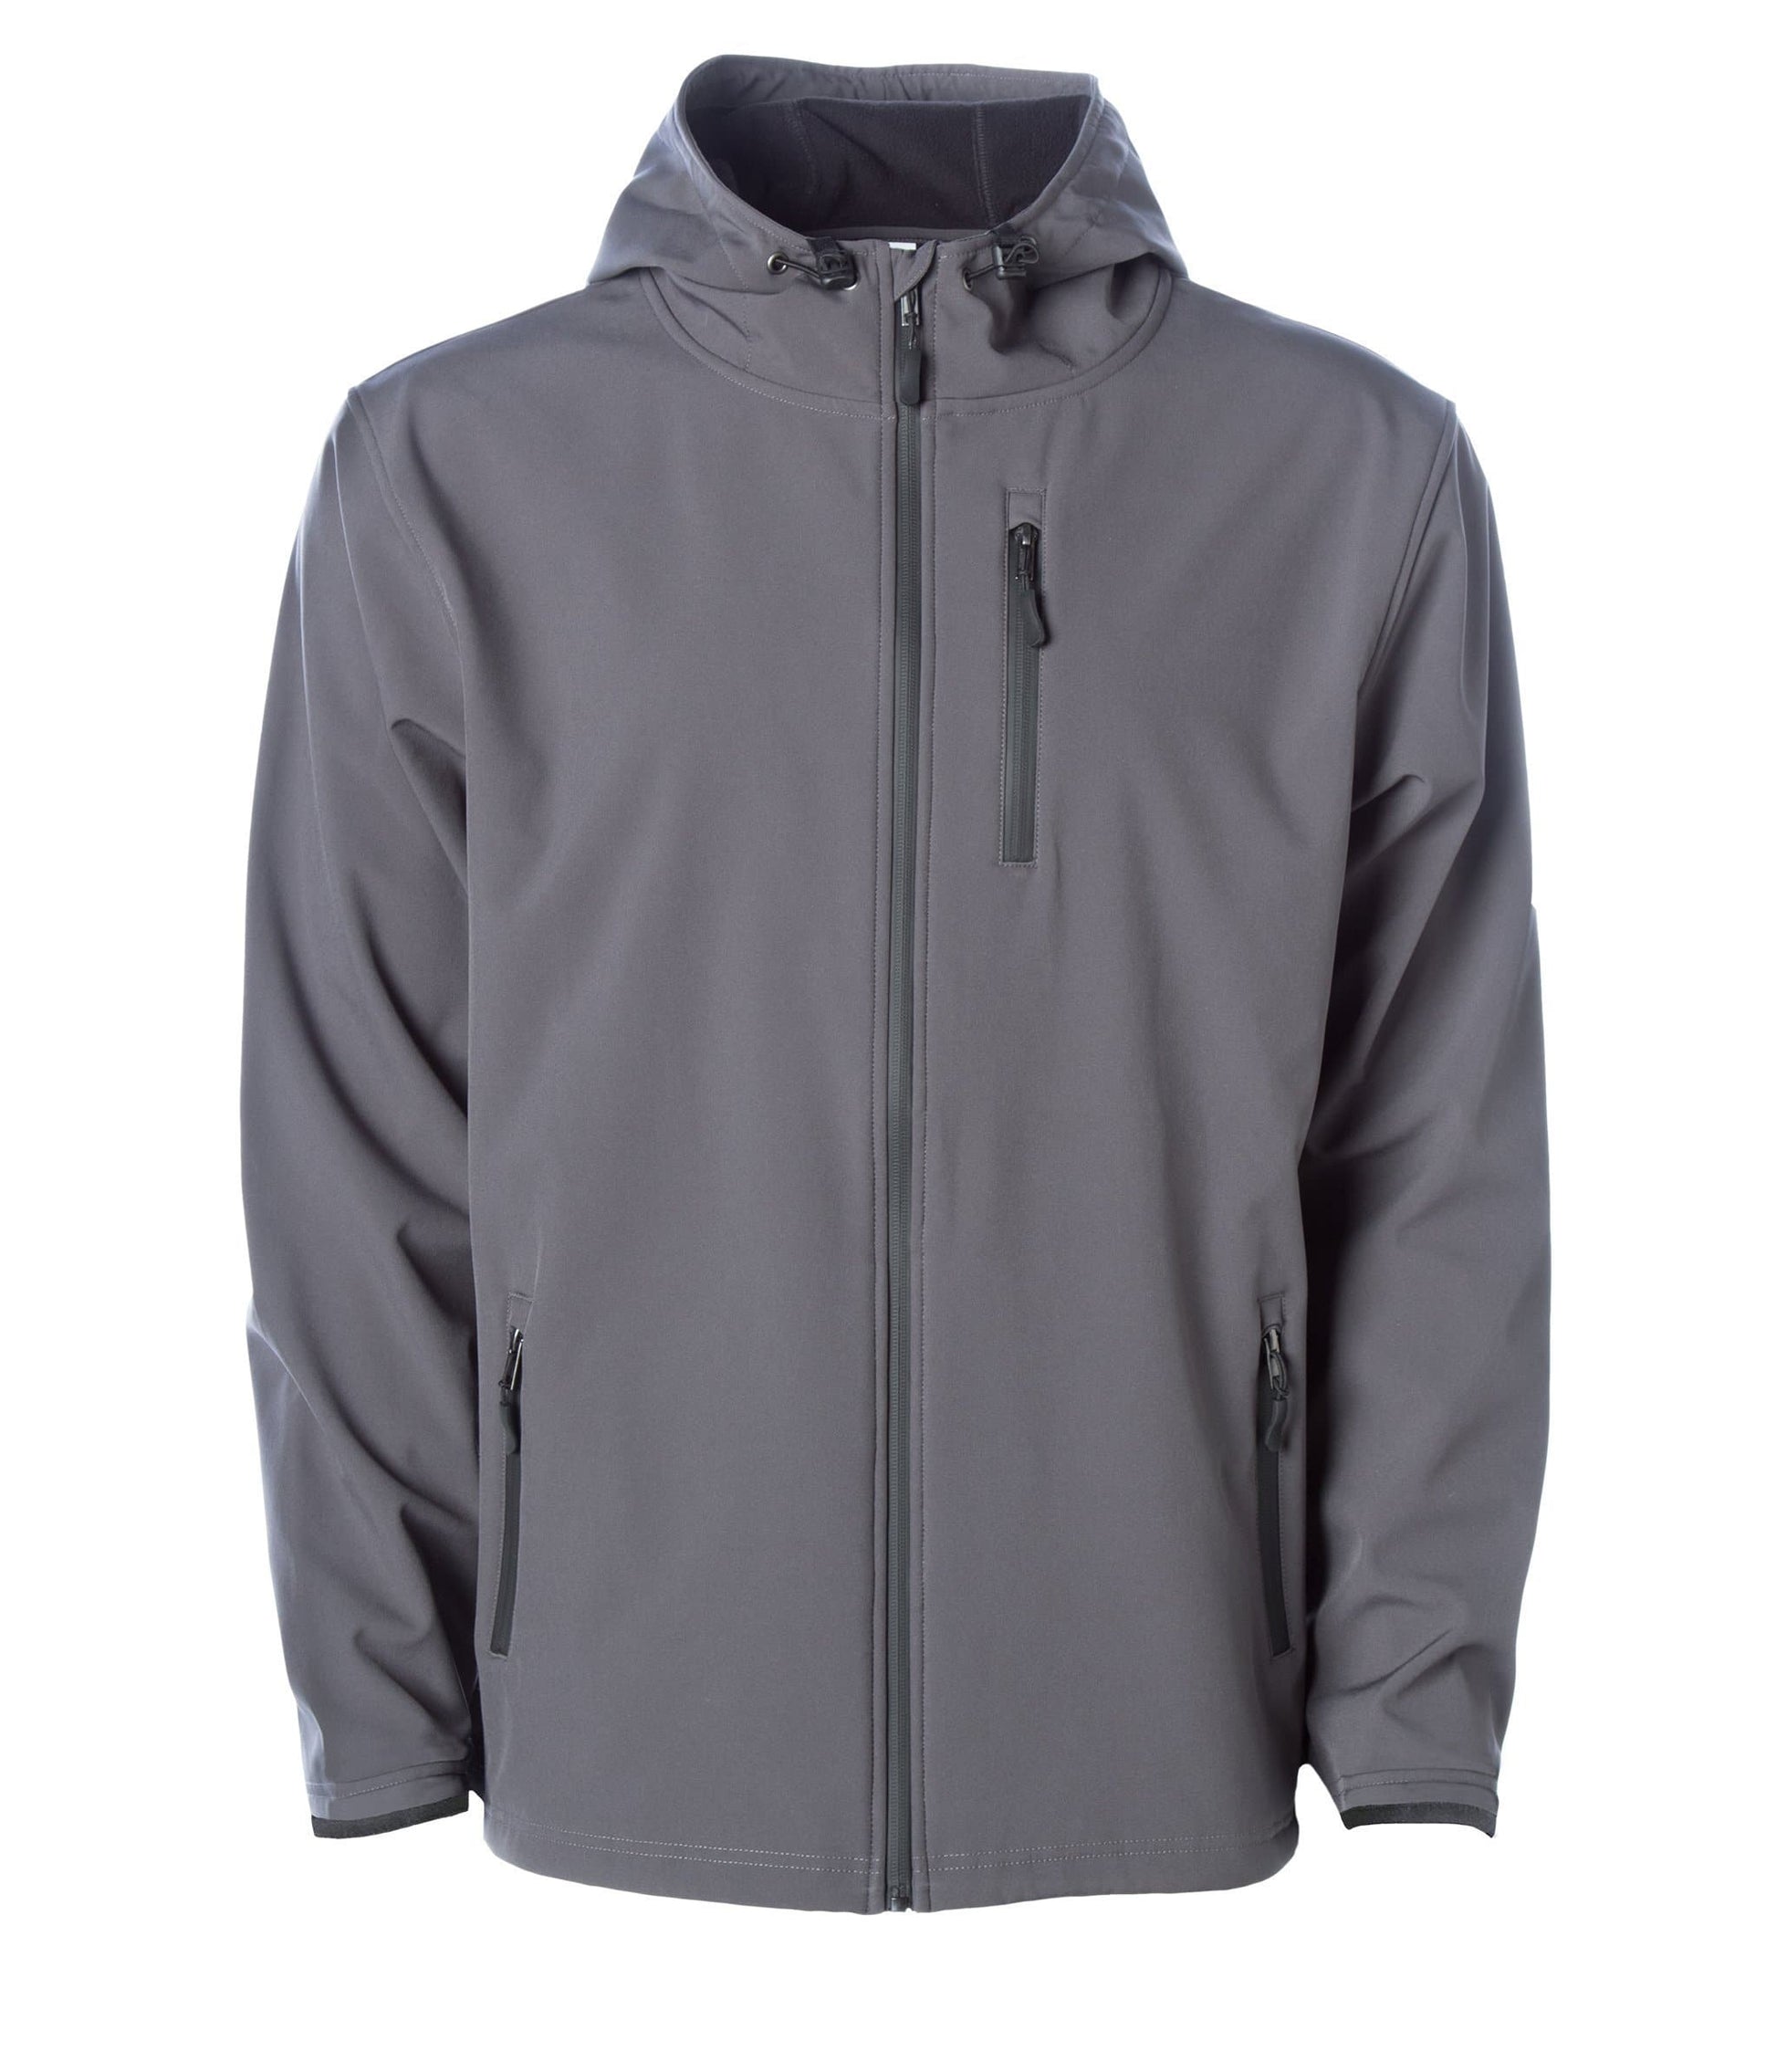 EXP35SSZ Poly Tech Water Resistant Soft Shell Jacket